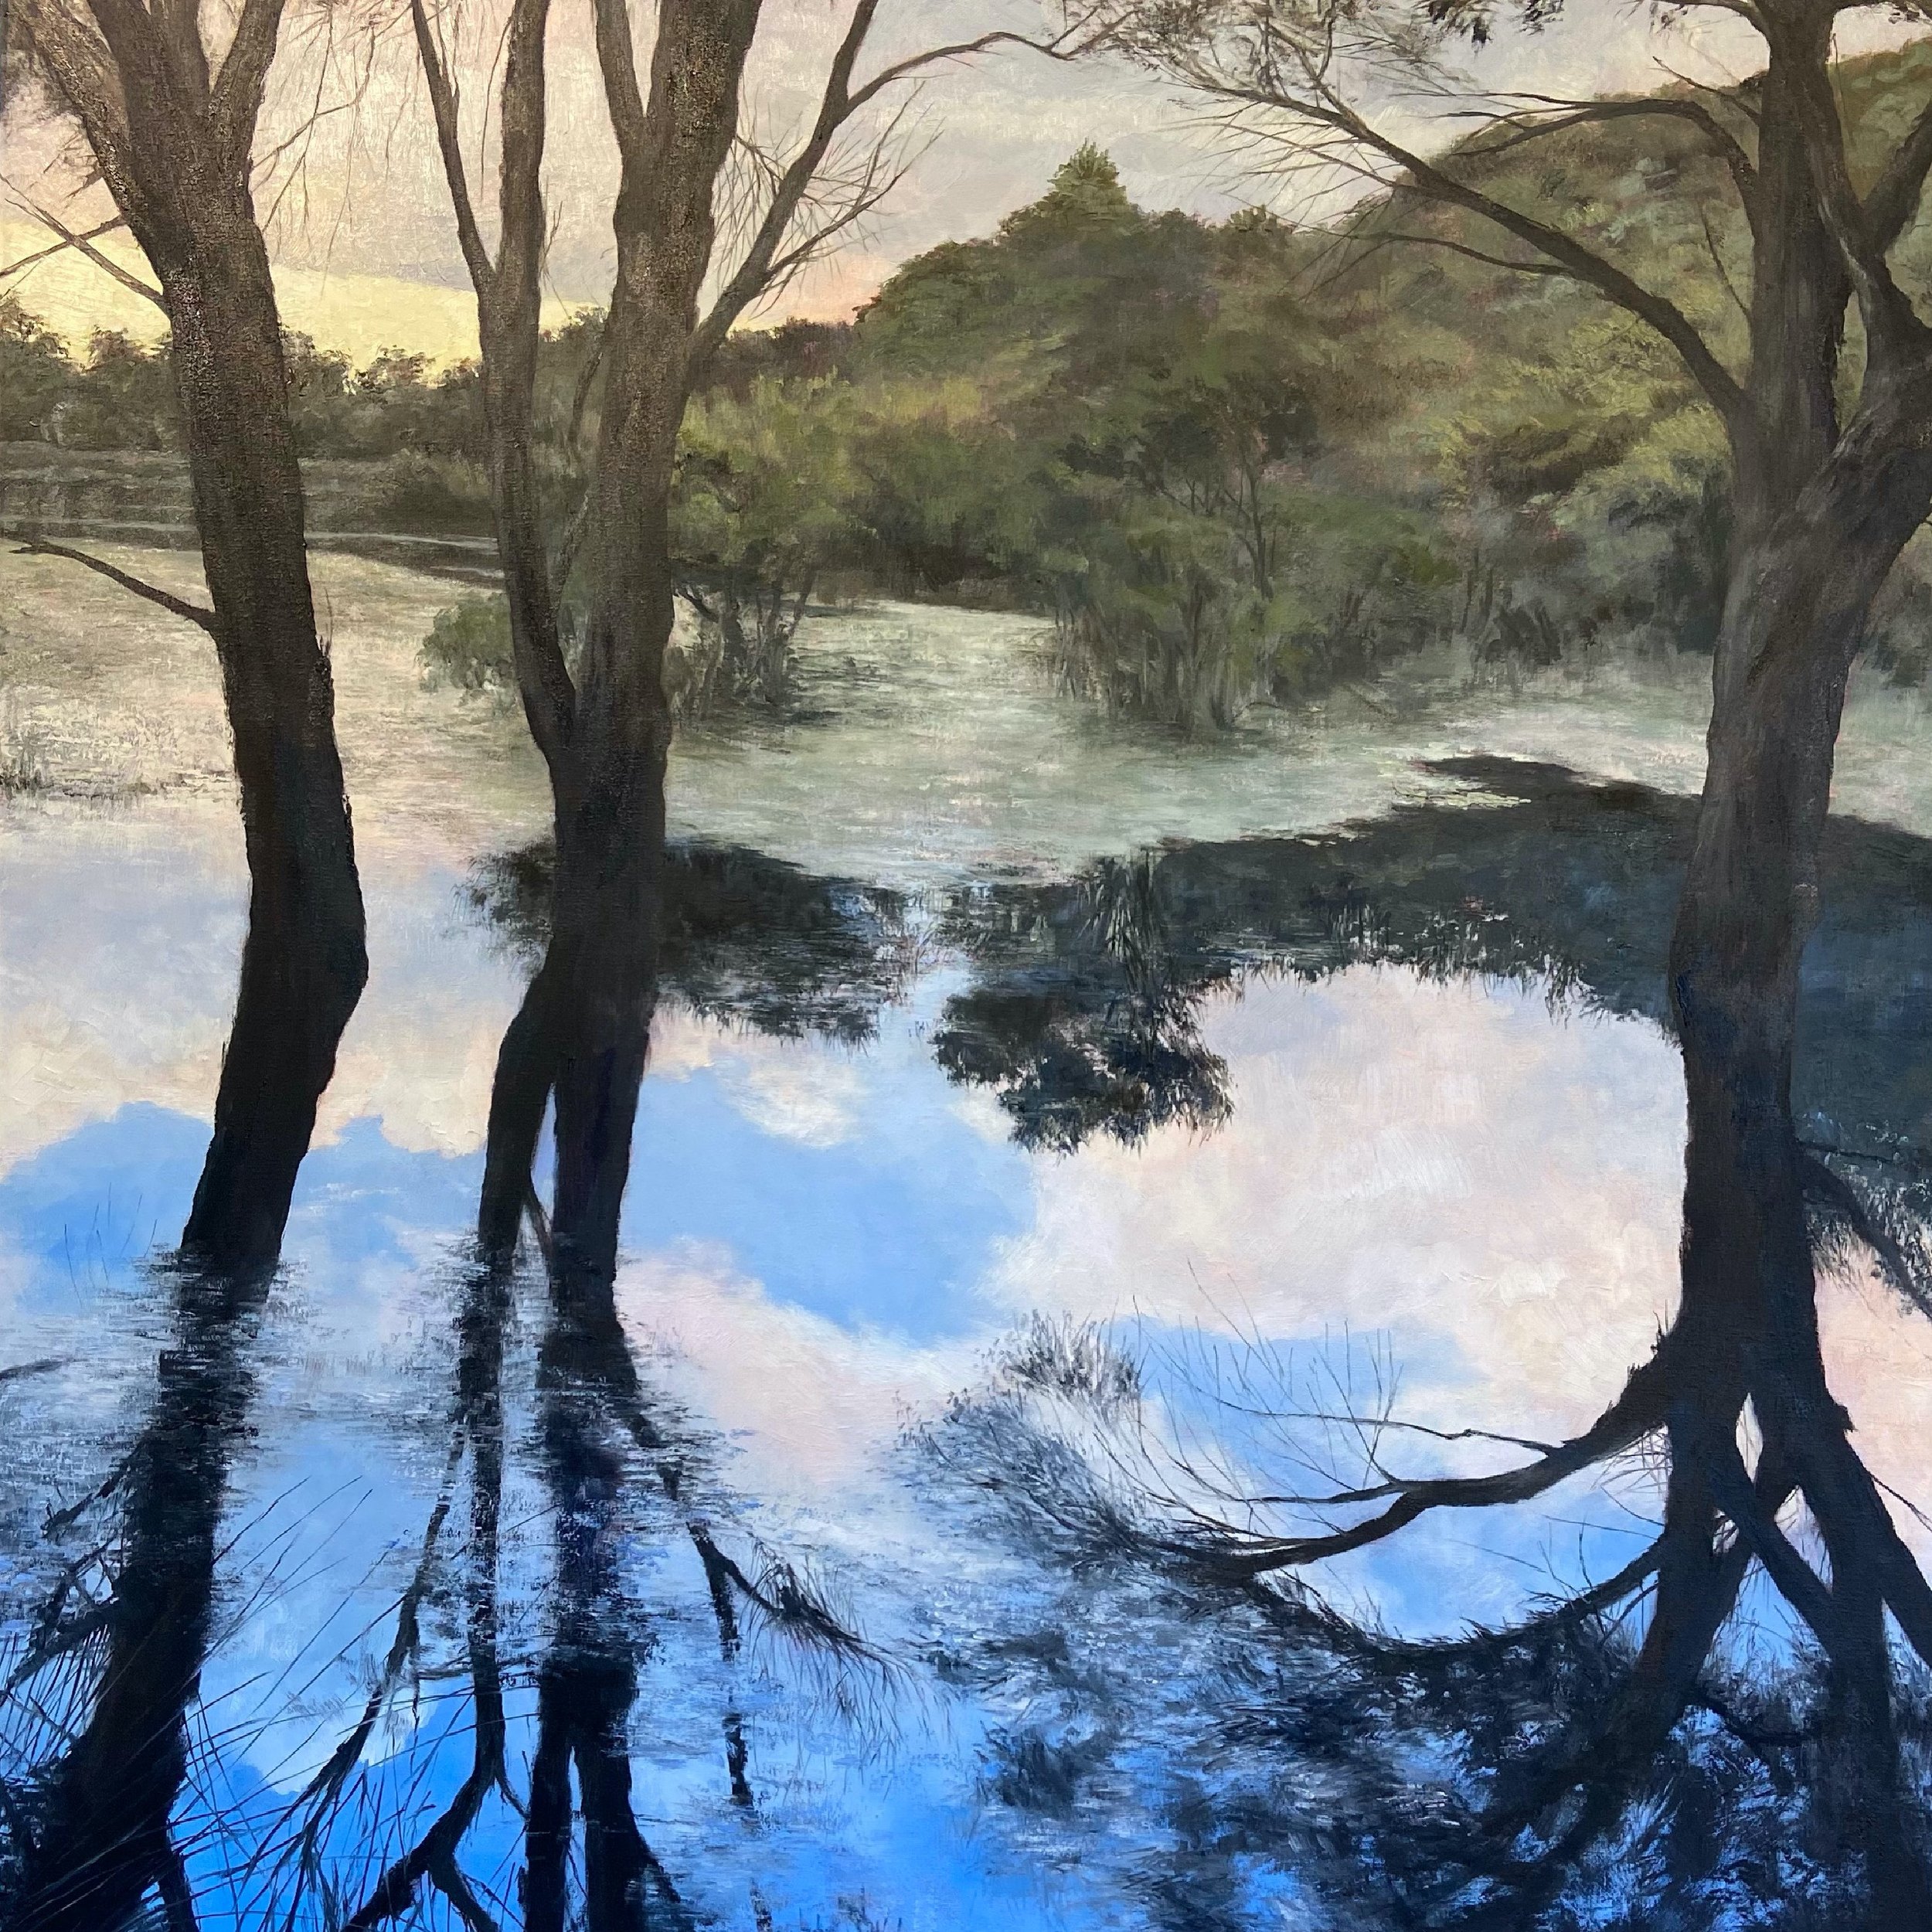 Mirrored Worlds, oil on canvas, 60 x 60 cm, Sold